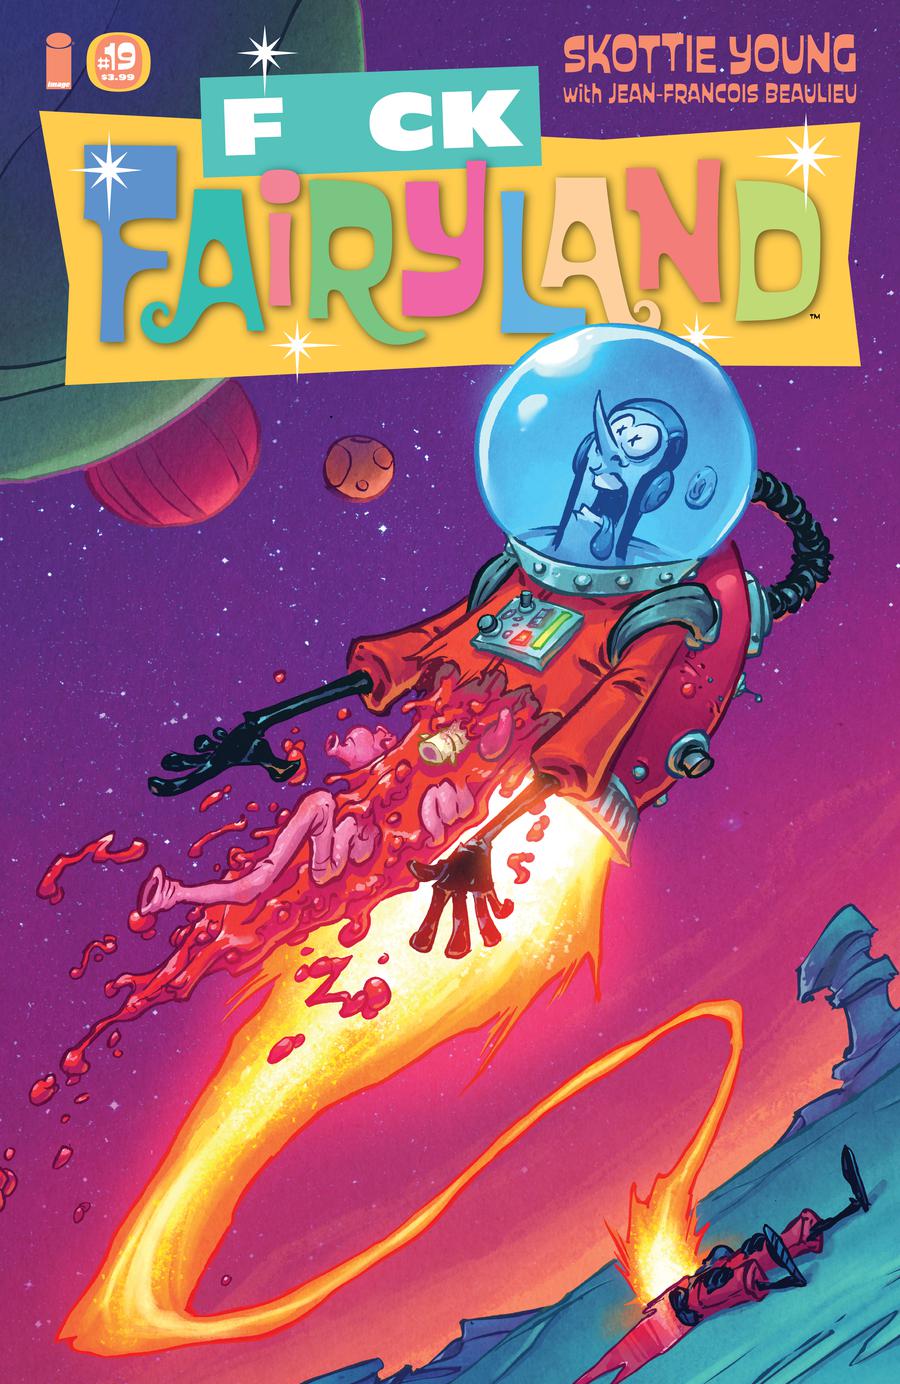 I Hate Fairyland #19 Cover B Variant Skottie Young F*ck Fairyland Cover